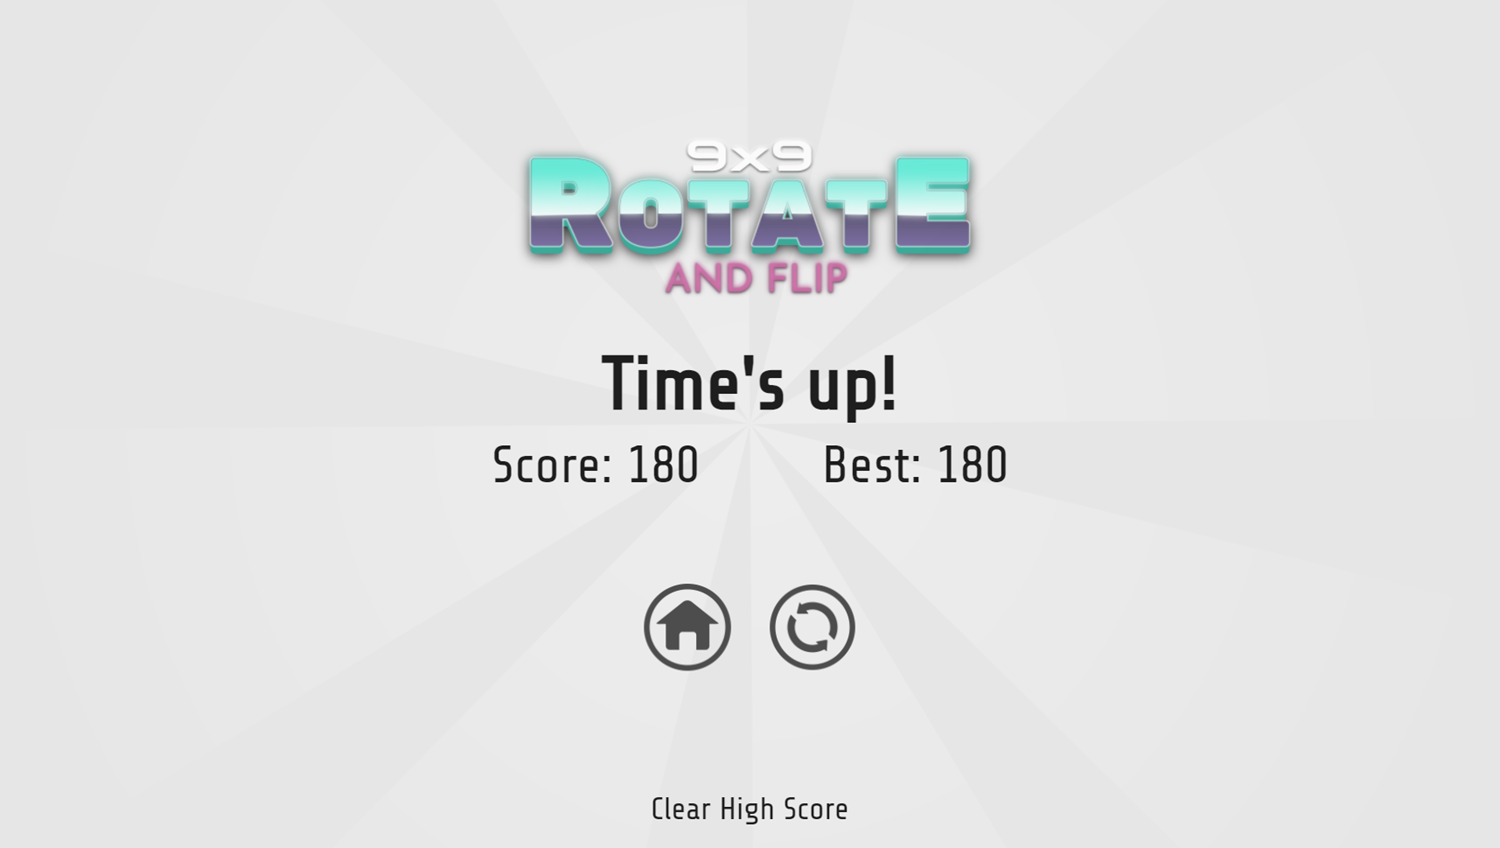 9x9 Rotate and Flip Game Time's Up Screenshot.